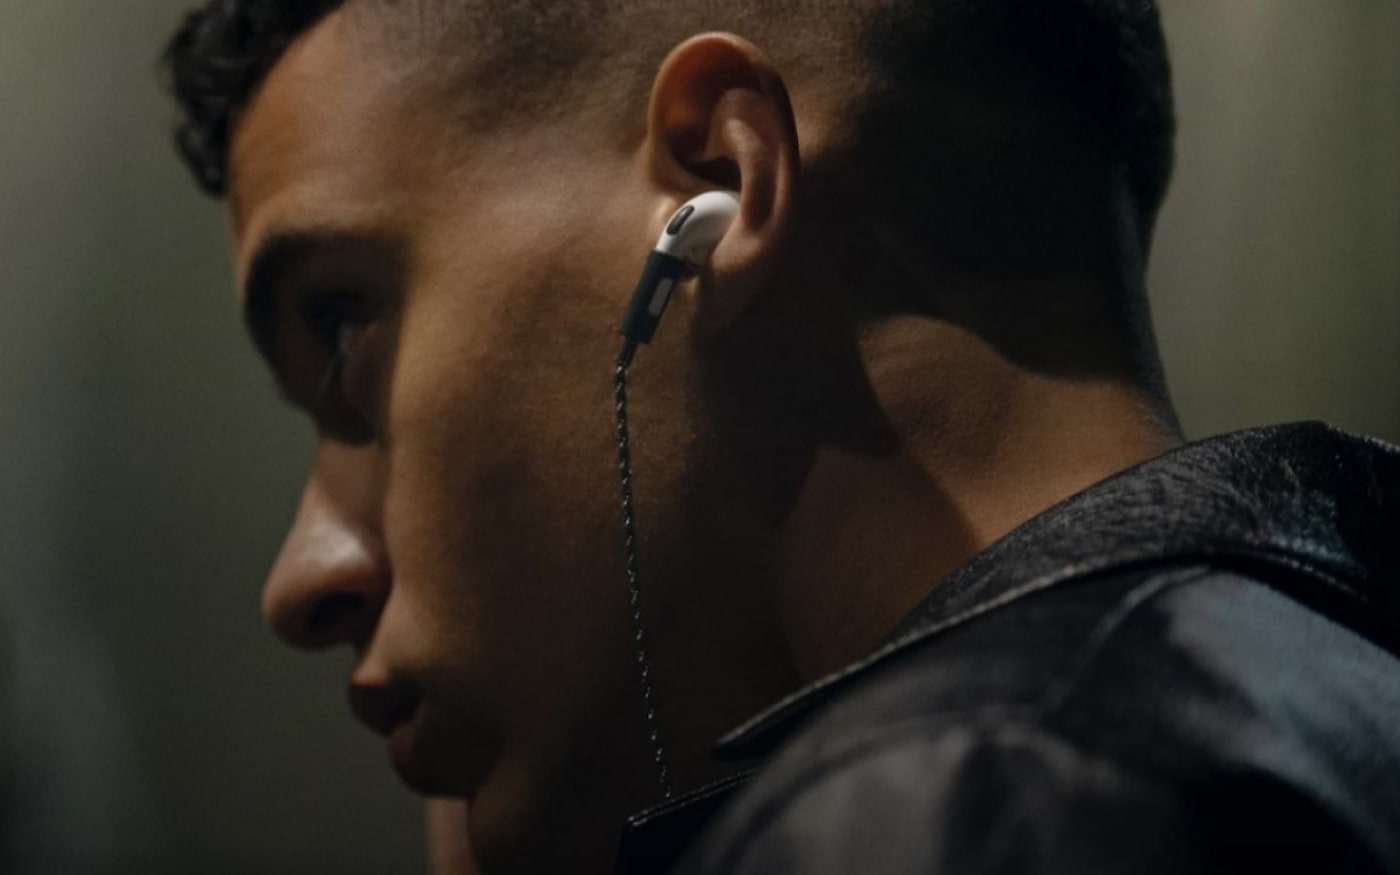 $ 90 accessory designed to keep Airpods Pro $ 250 safe